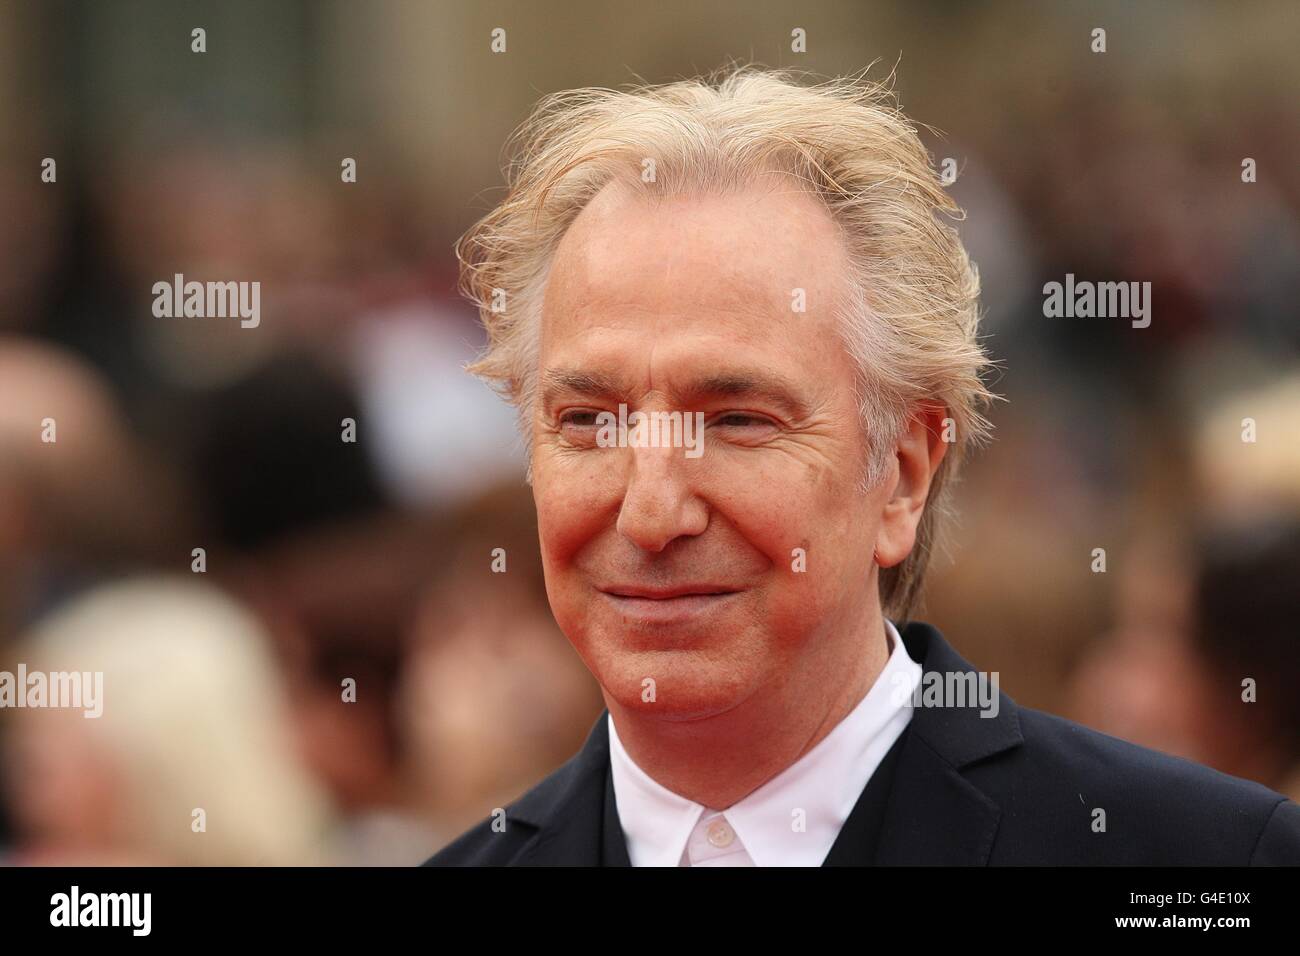 Alan Rickman arriving for the world premiere of Harry Potter And The Deathly Hallows: Part 2. Stock Photo